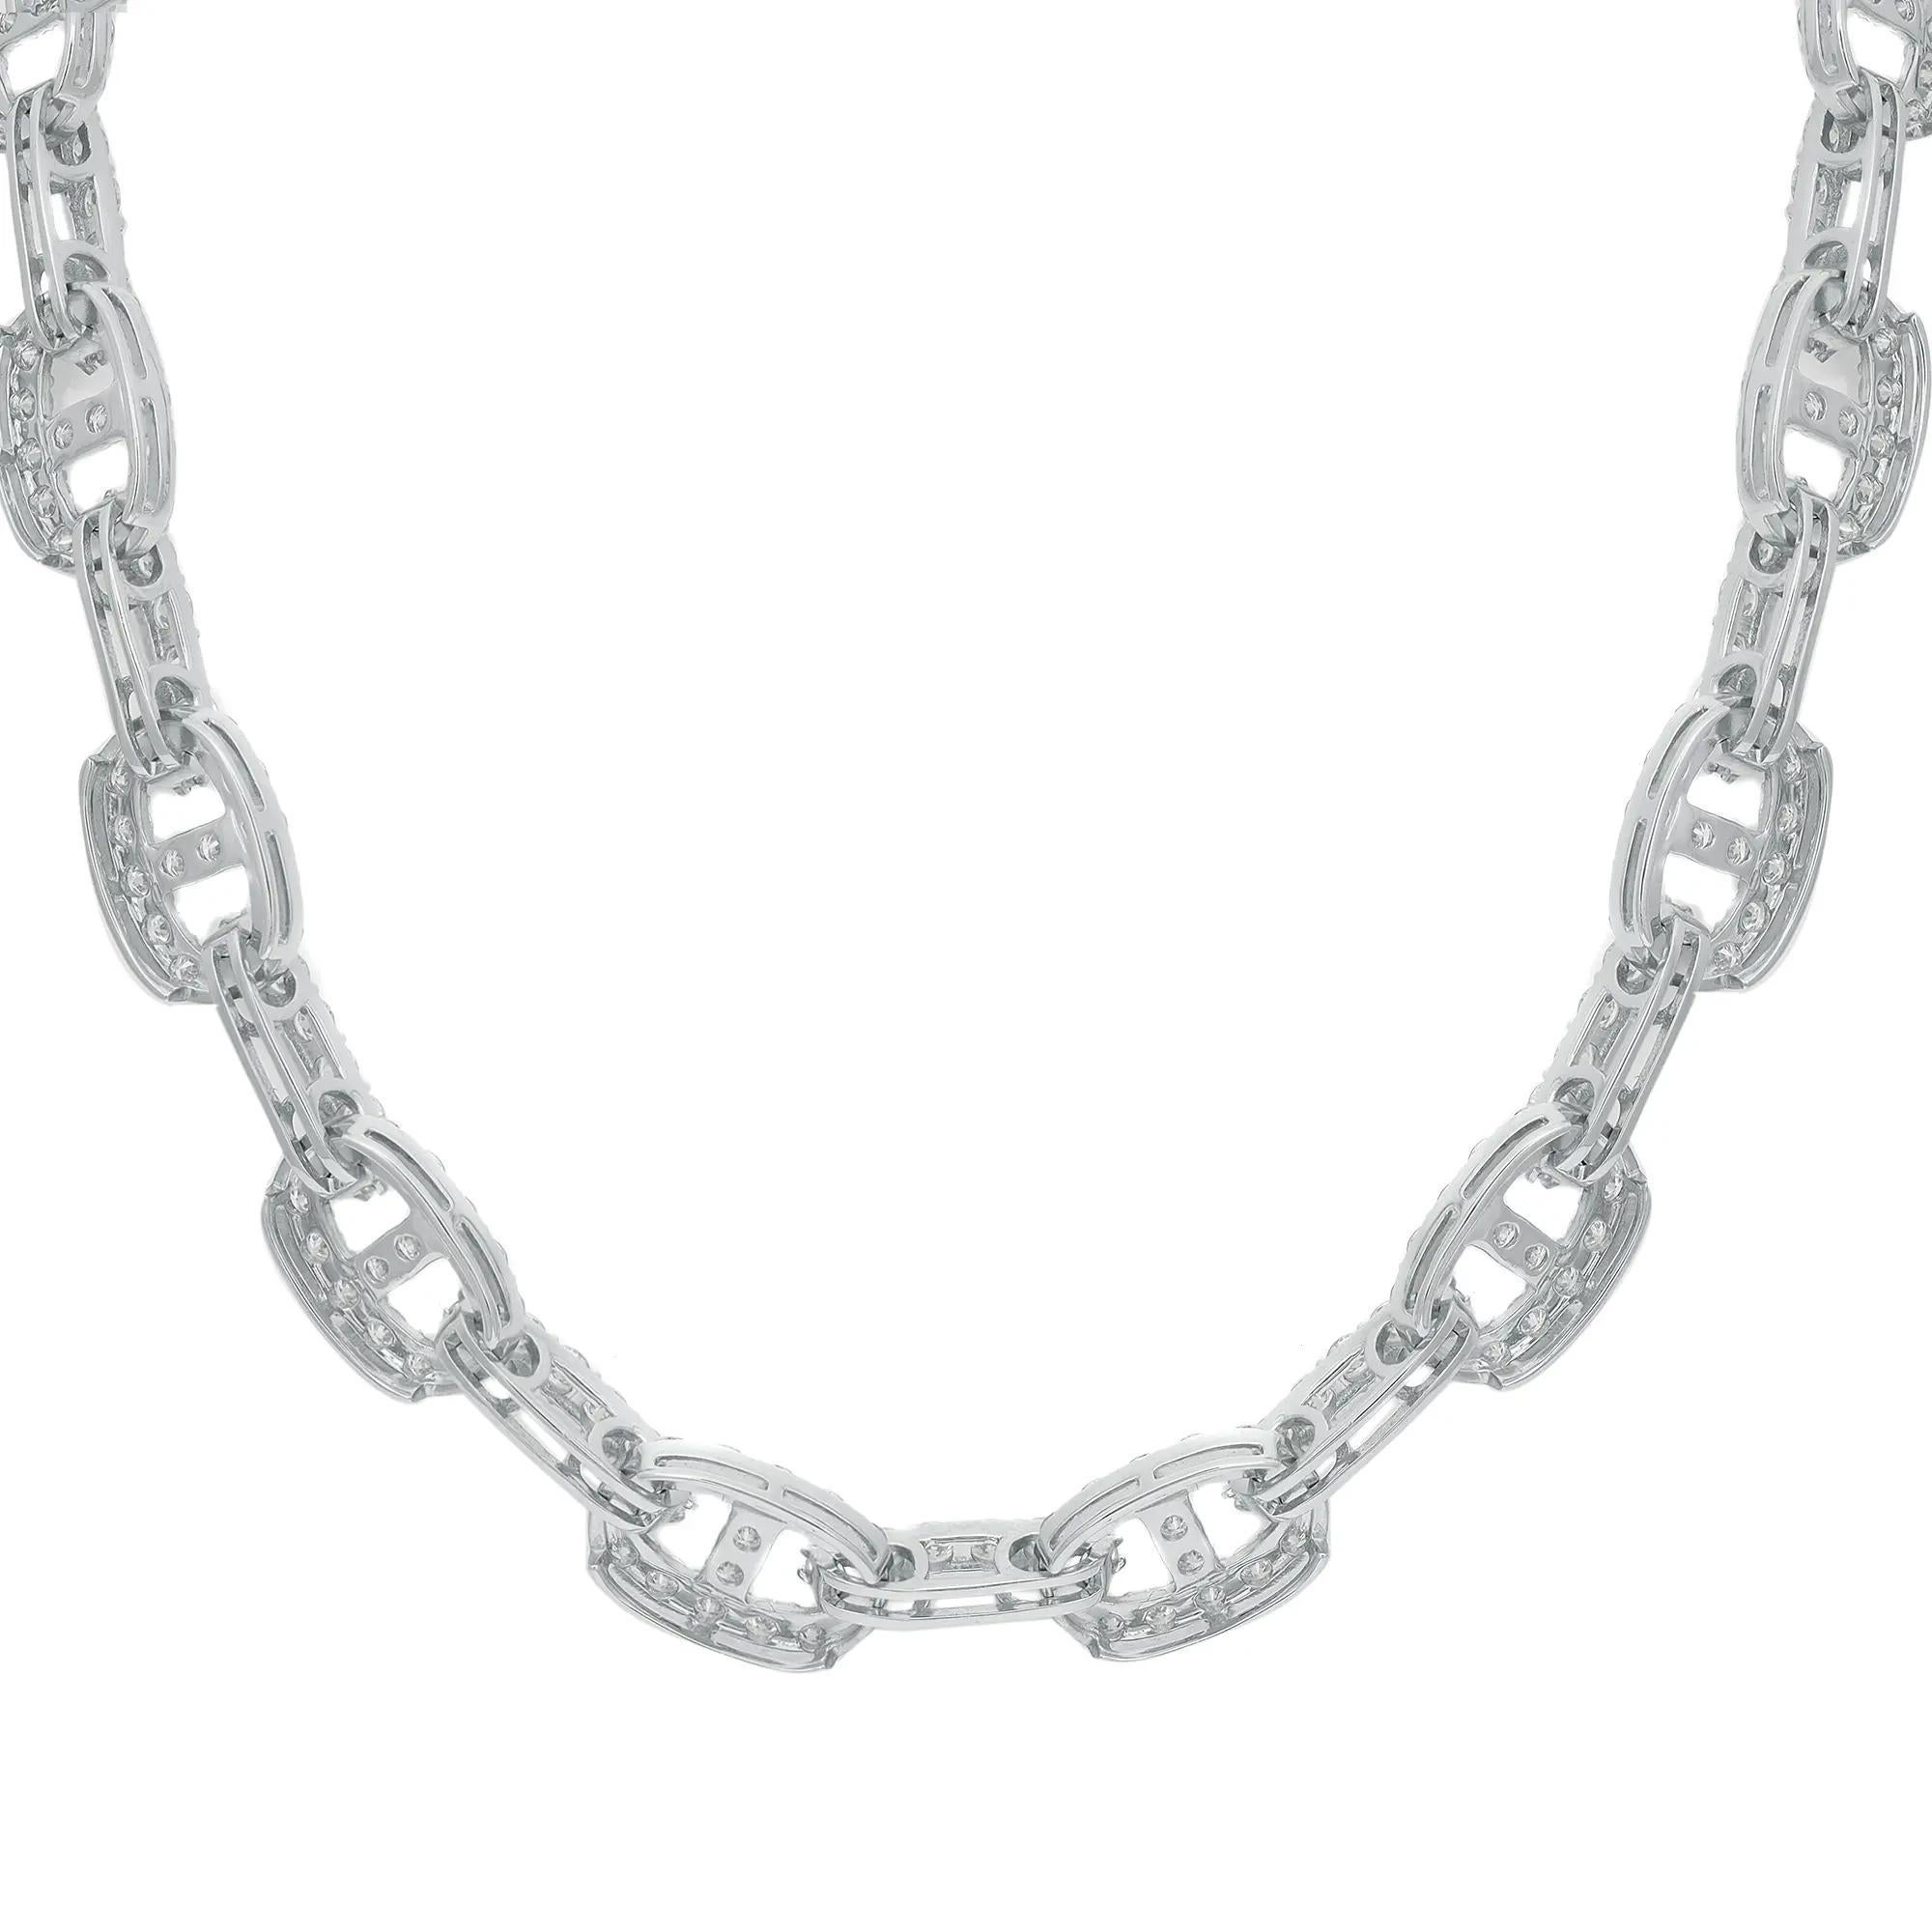 Round Cut Diamond Link Chain Necklace 18K White Gold 14.96Cttw 17.5 Inches In New Condition For Sale In New York, NY